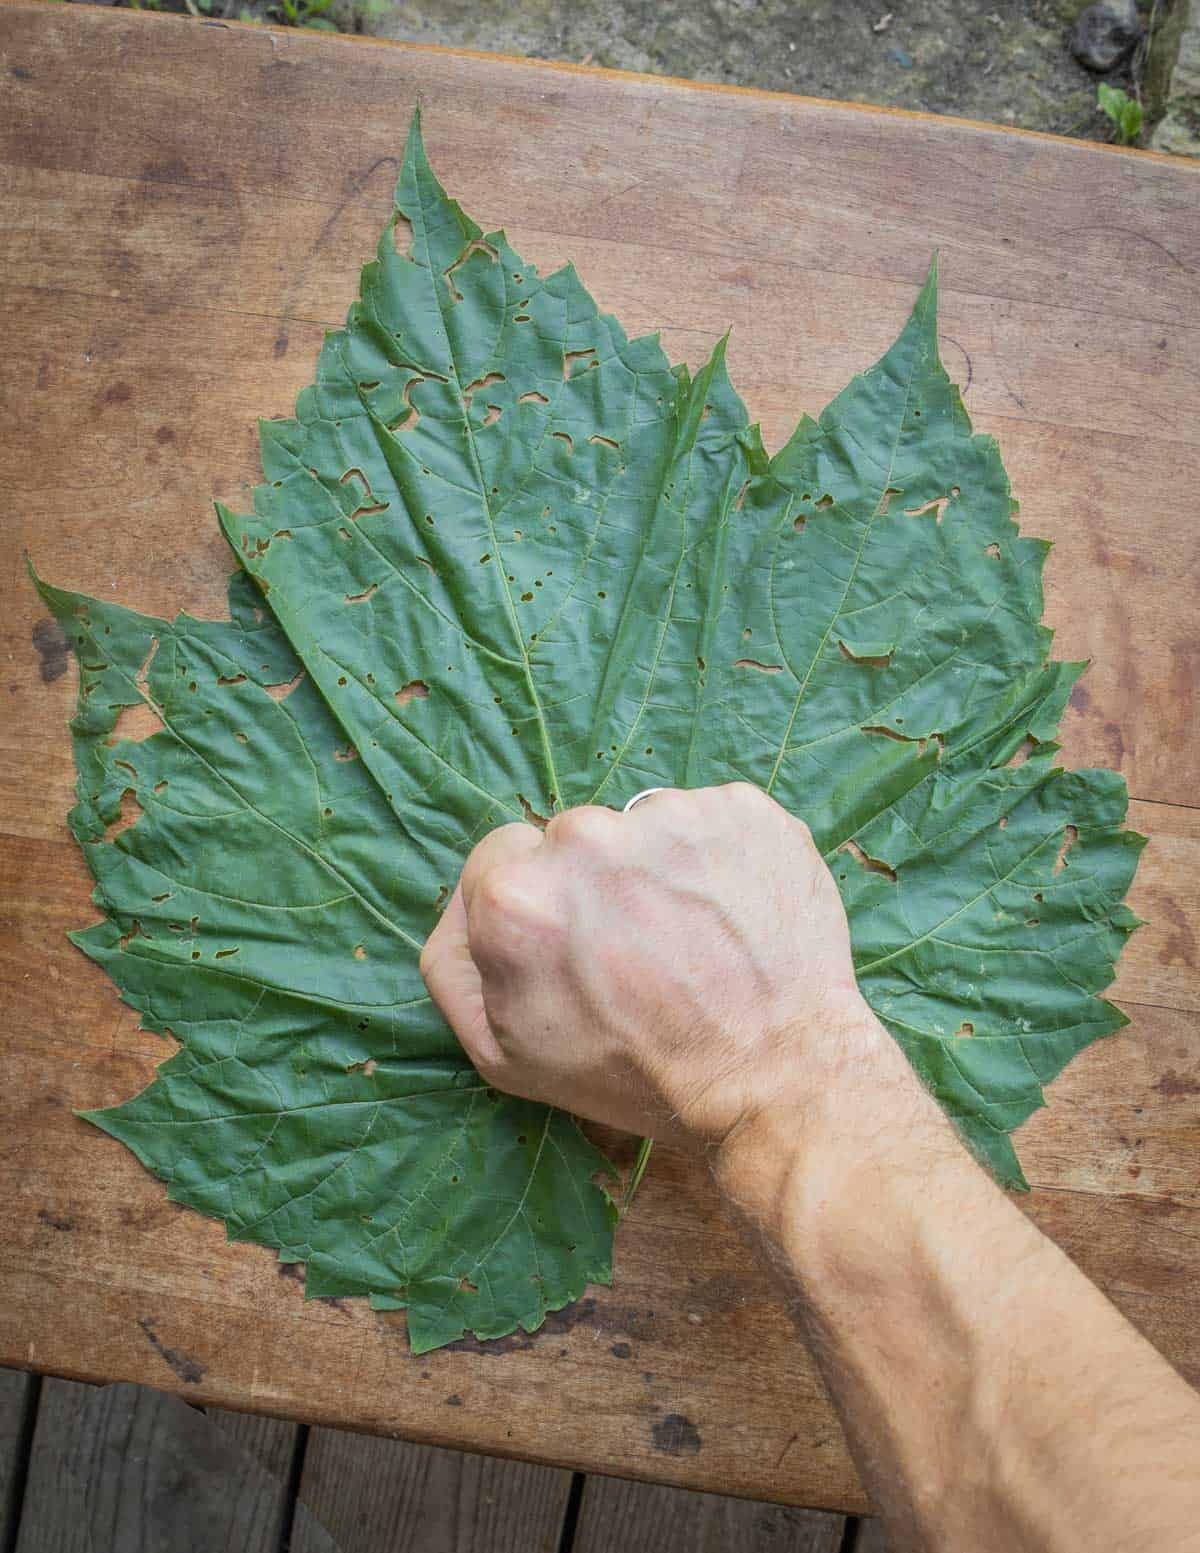 A closed fist held over a large grape leaf to show its size.